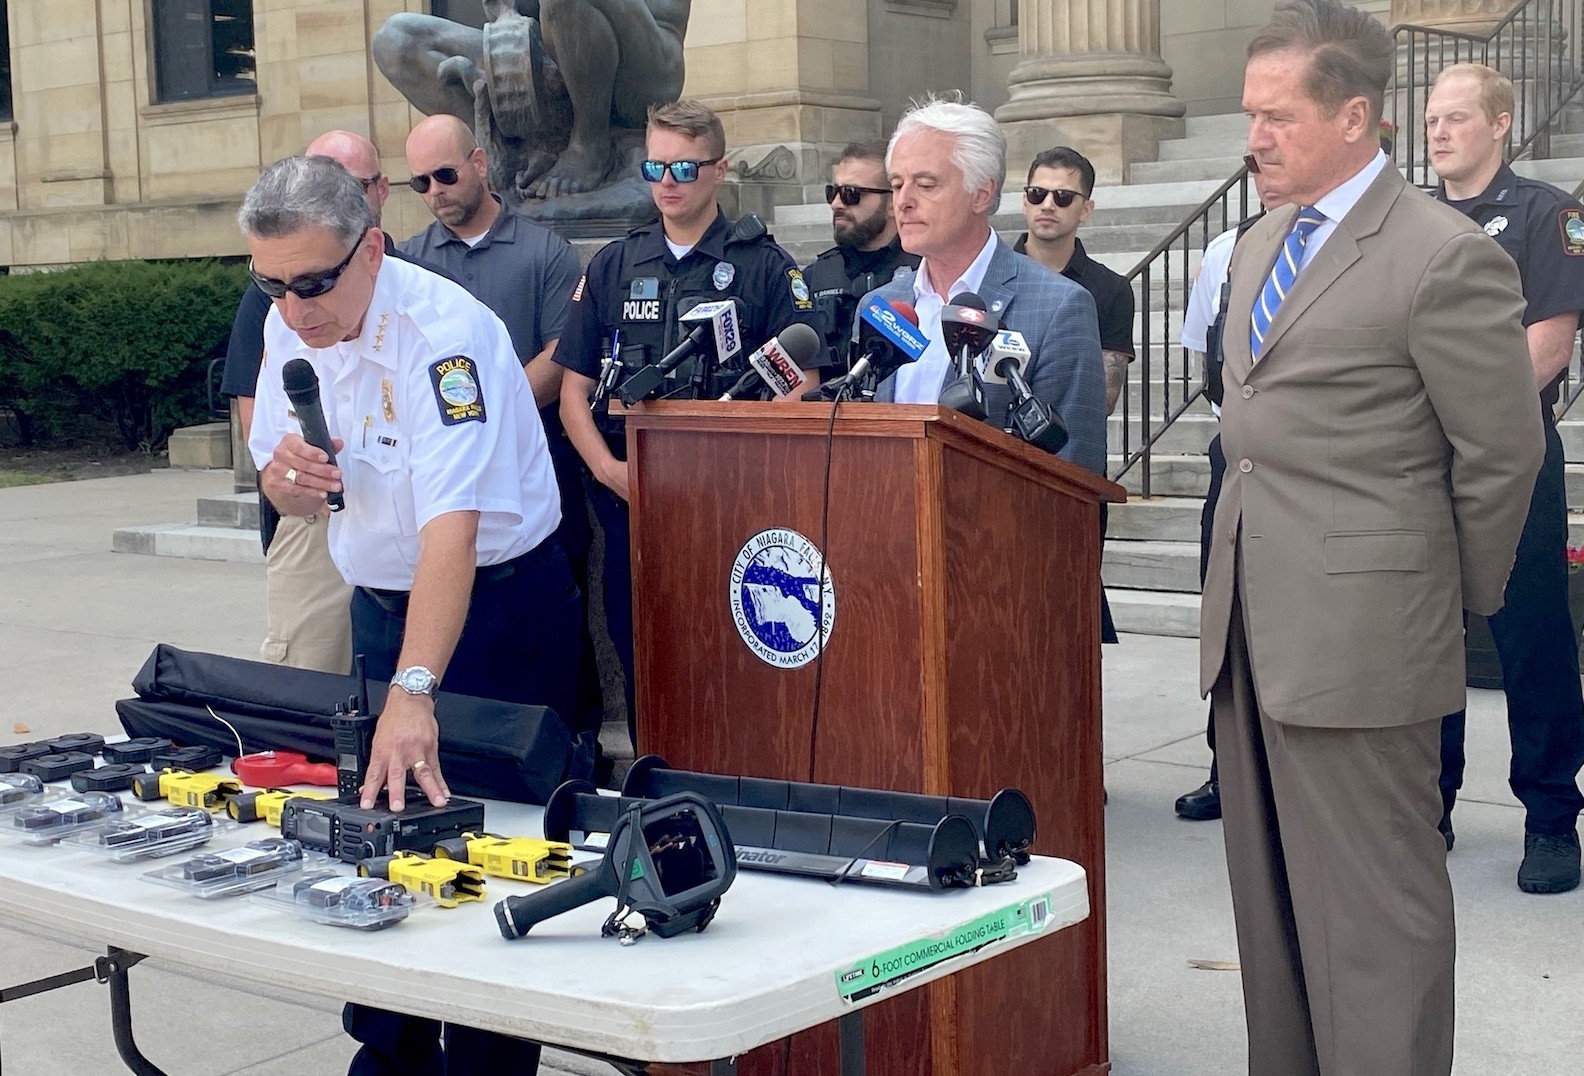 NFPD Superintendent John Faso with new equipment. (Image courtesy of Congressman Brian Higgins' office)